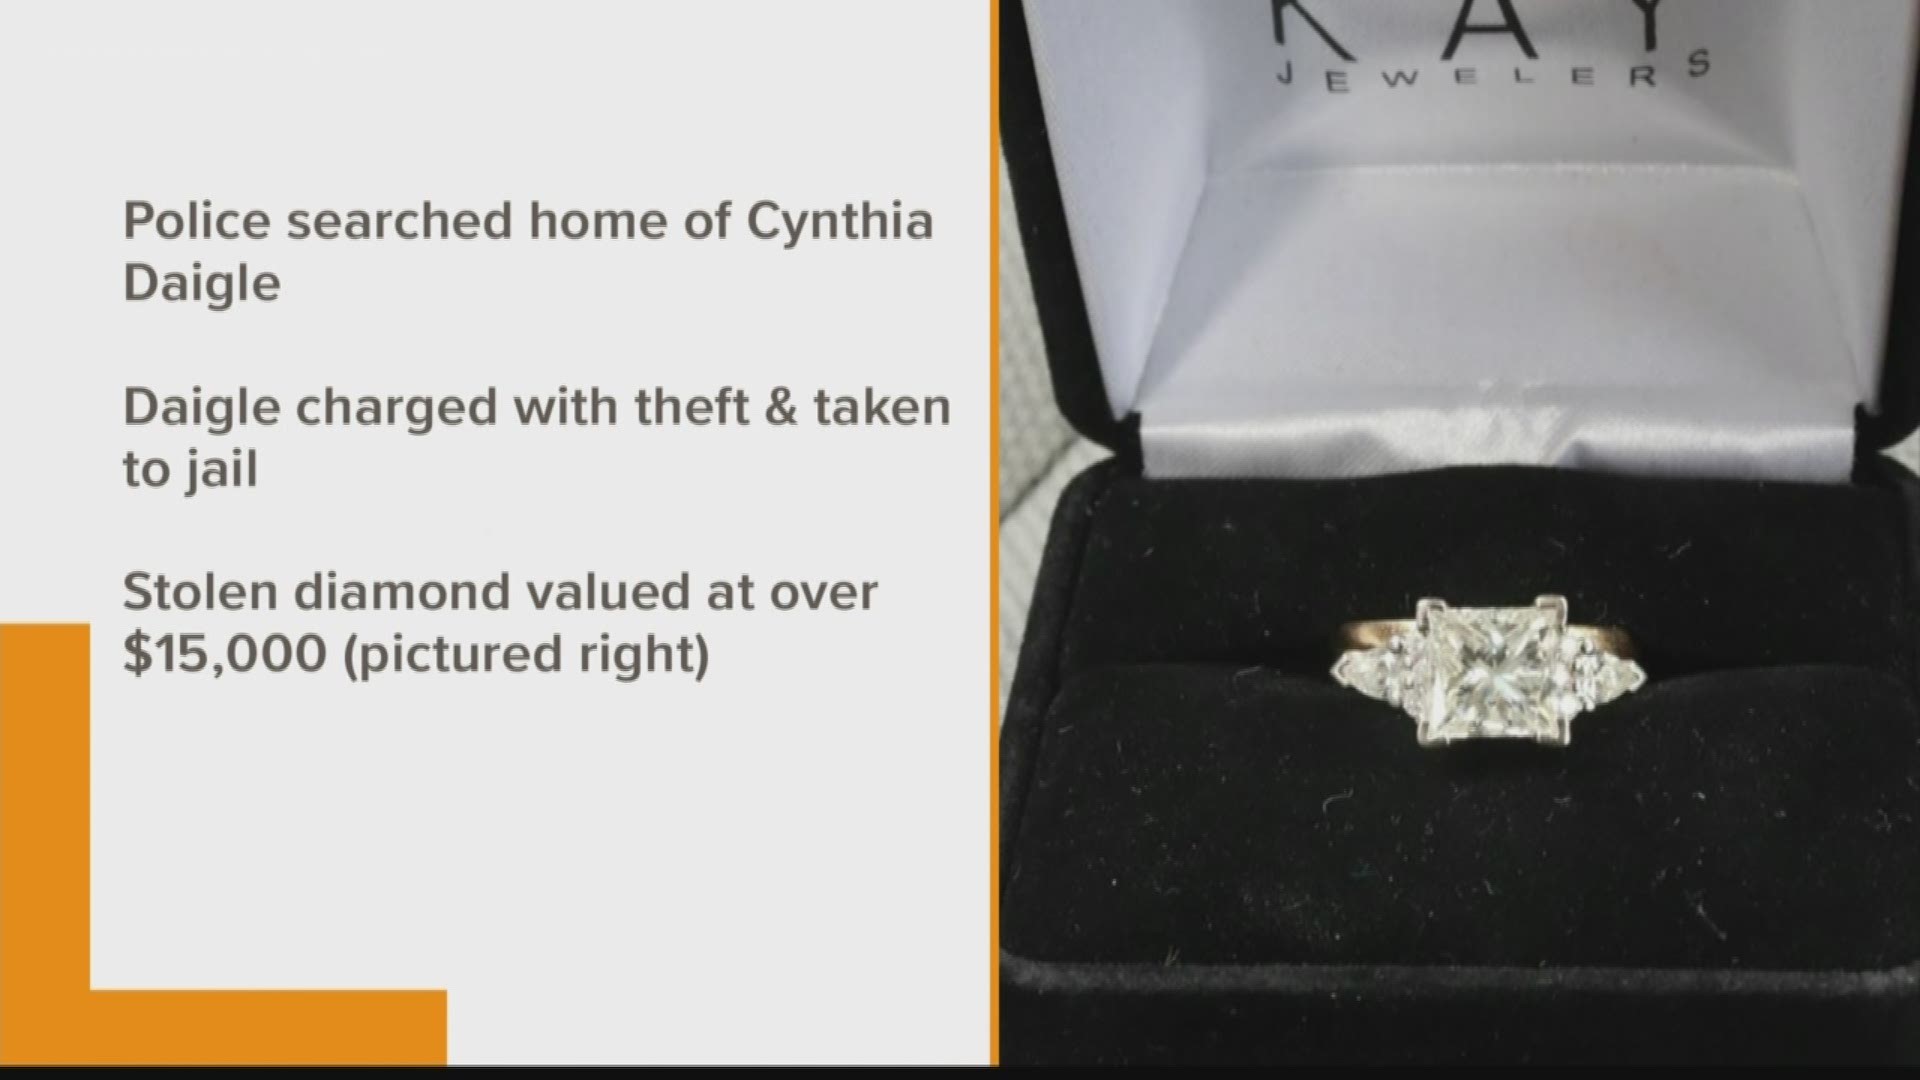 Officers searched Cynthia Daigle's home after a client reported jewelry missing. During the search, police found the missing jewelry including a 3-carat diamond ring